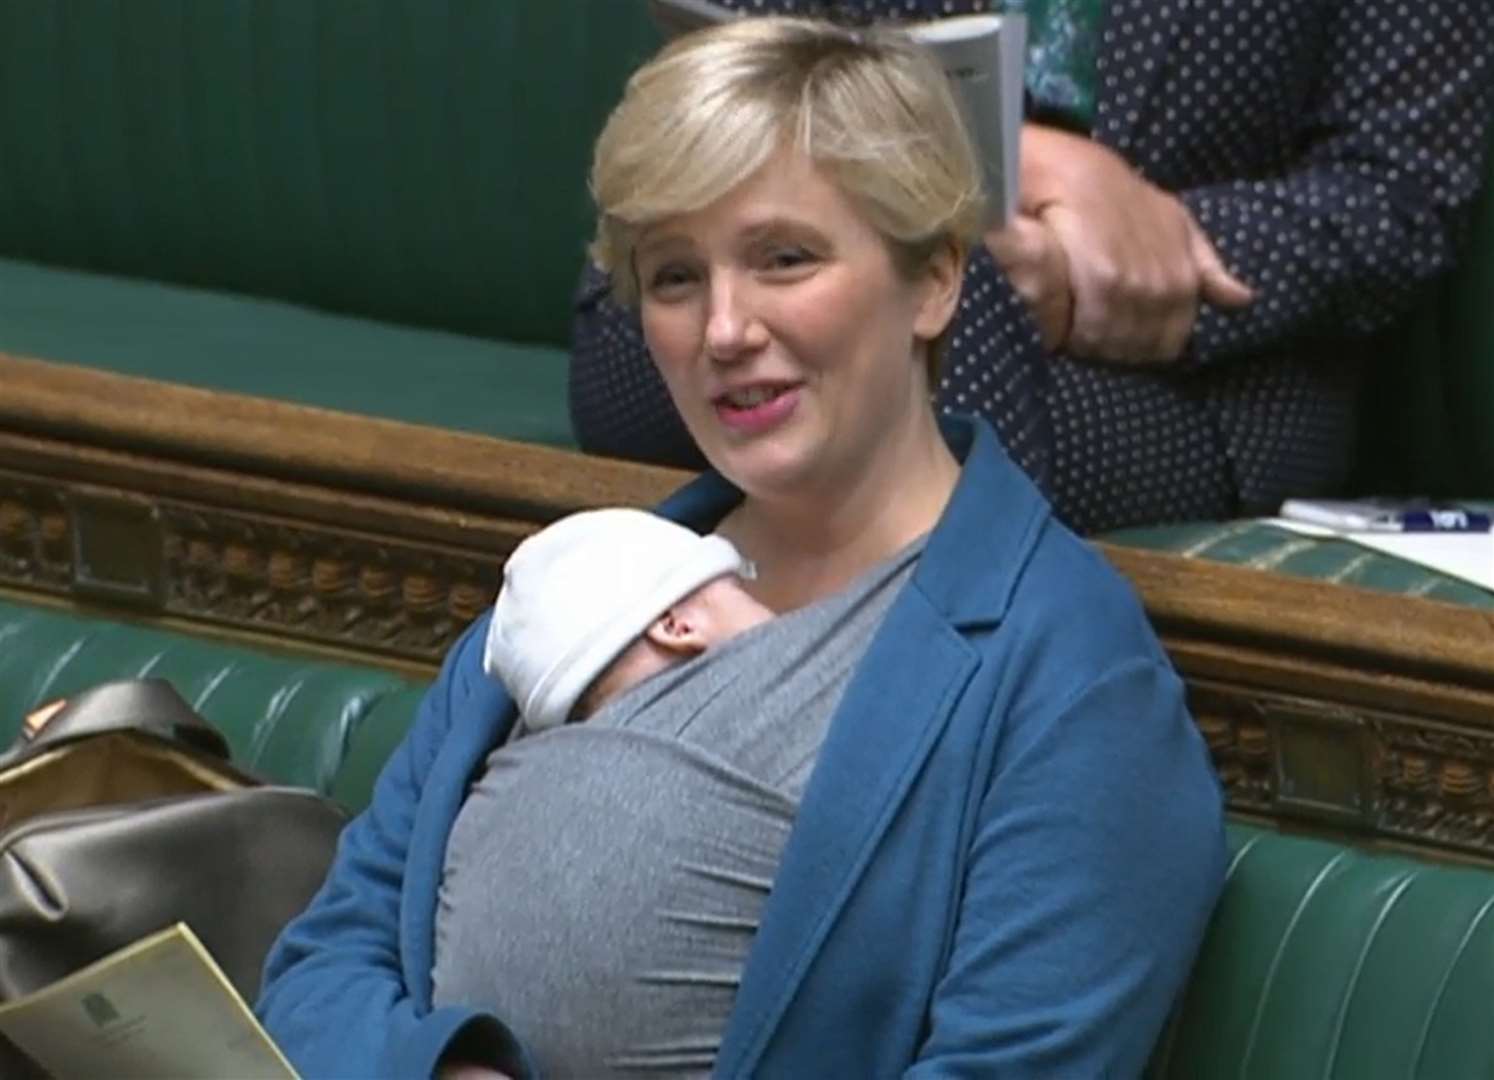 Labour MP Stella Creasy speaking in the chamber of the House of Commons with her newborn baby strapped to her (House of Commons/PA)